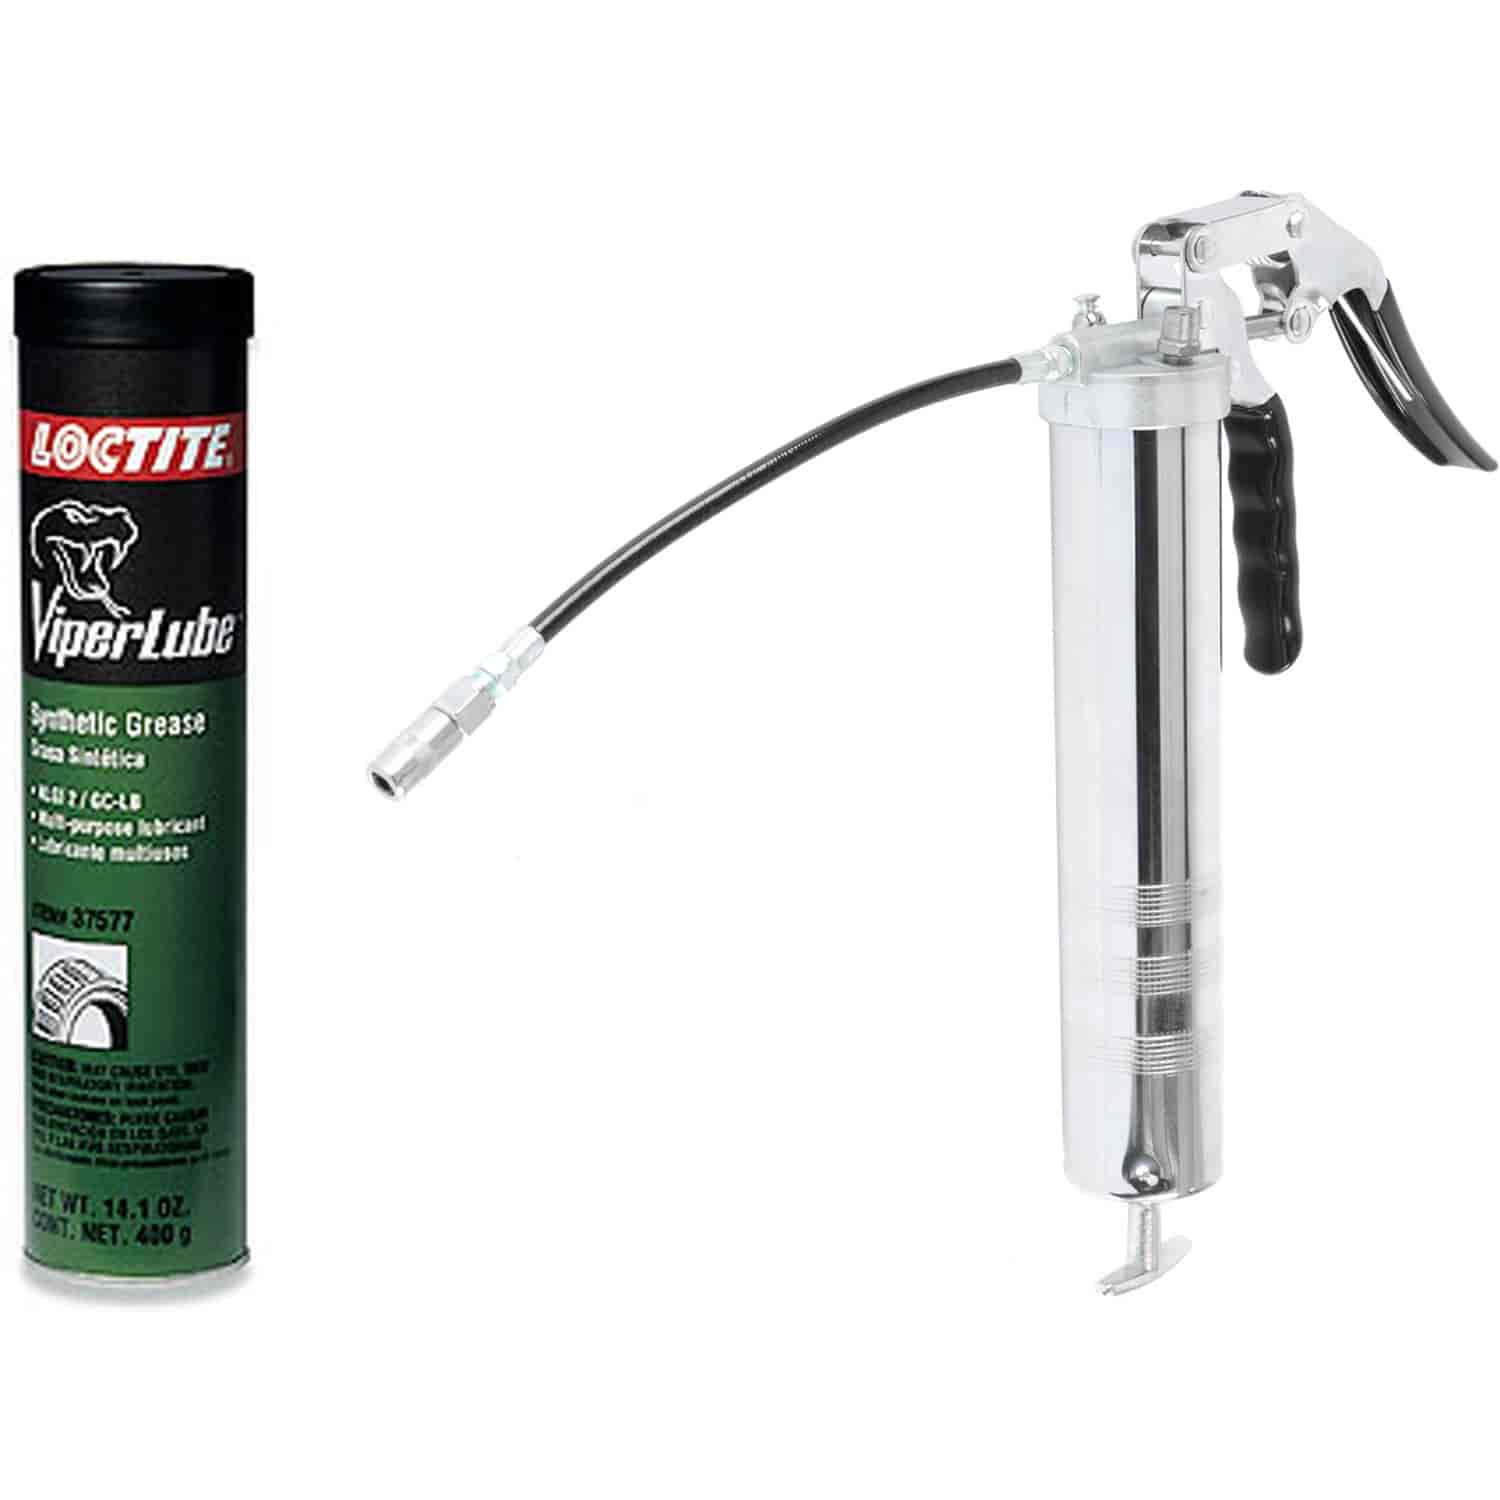 Loctite Viper Lube Synthetic Grease and Gun Kit